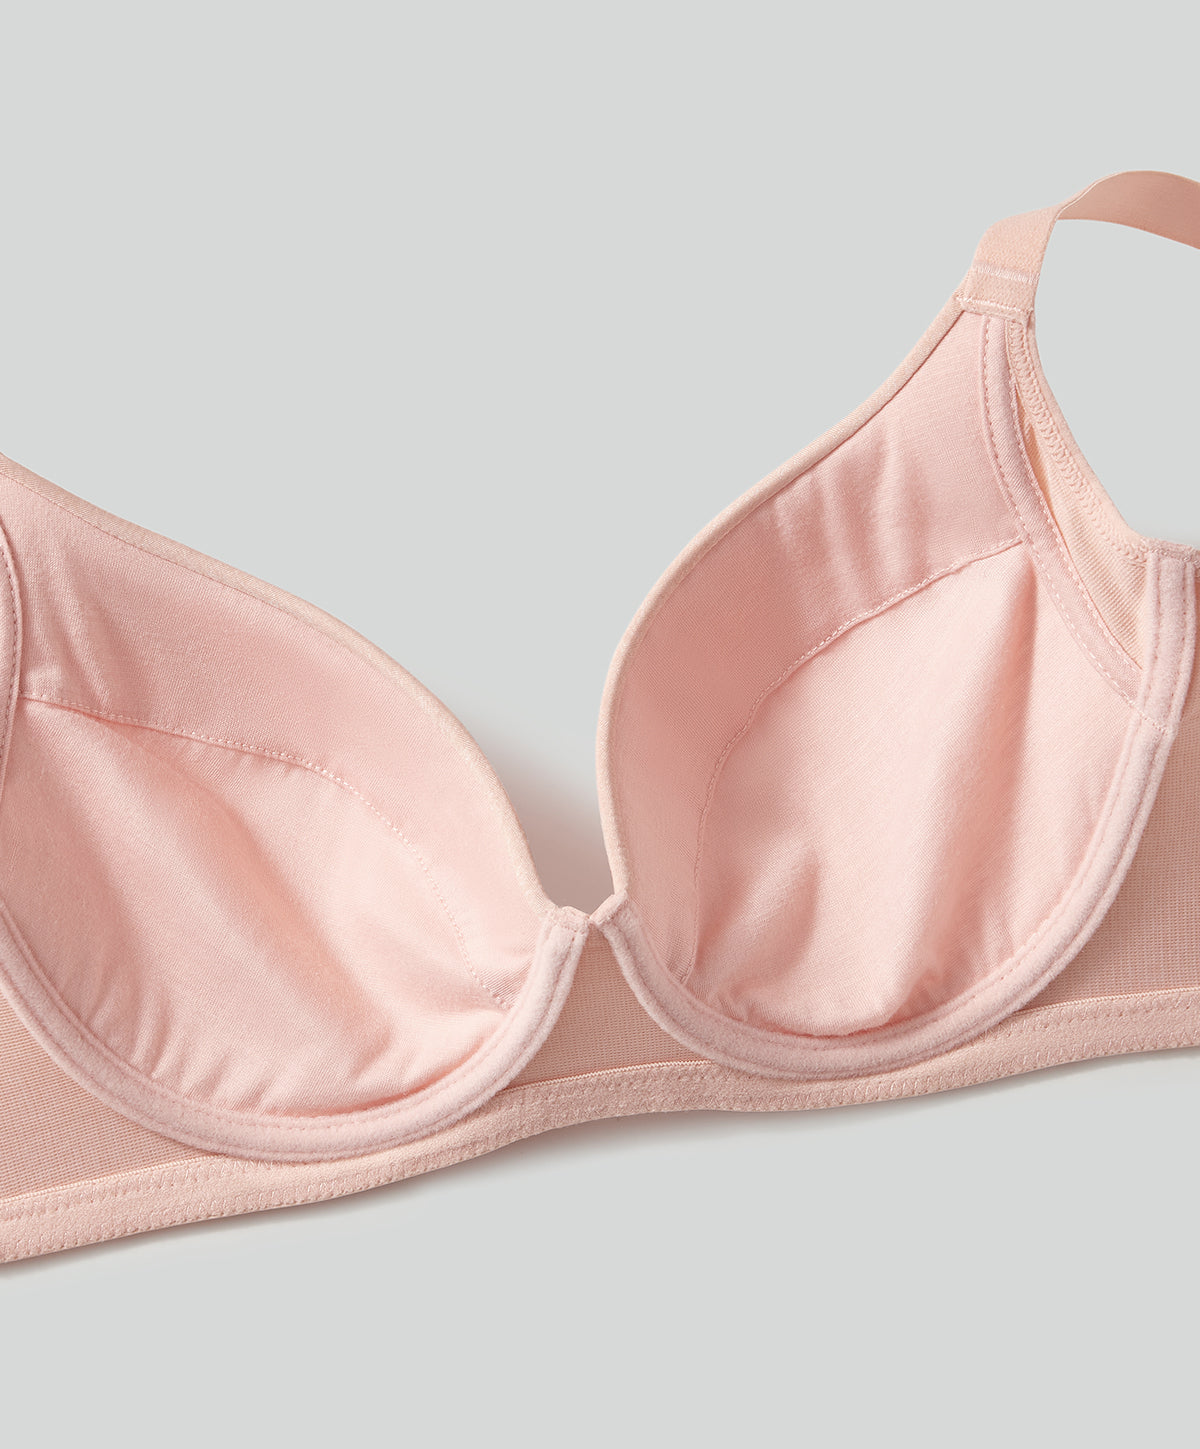 Harmonic Smooth Full Coverage - Pierre Cardin Lingerie